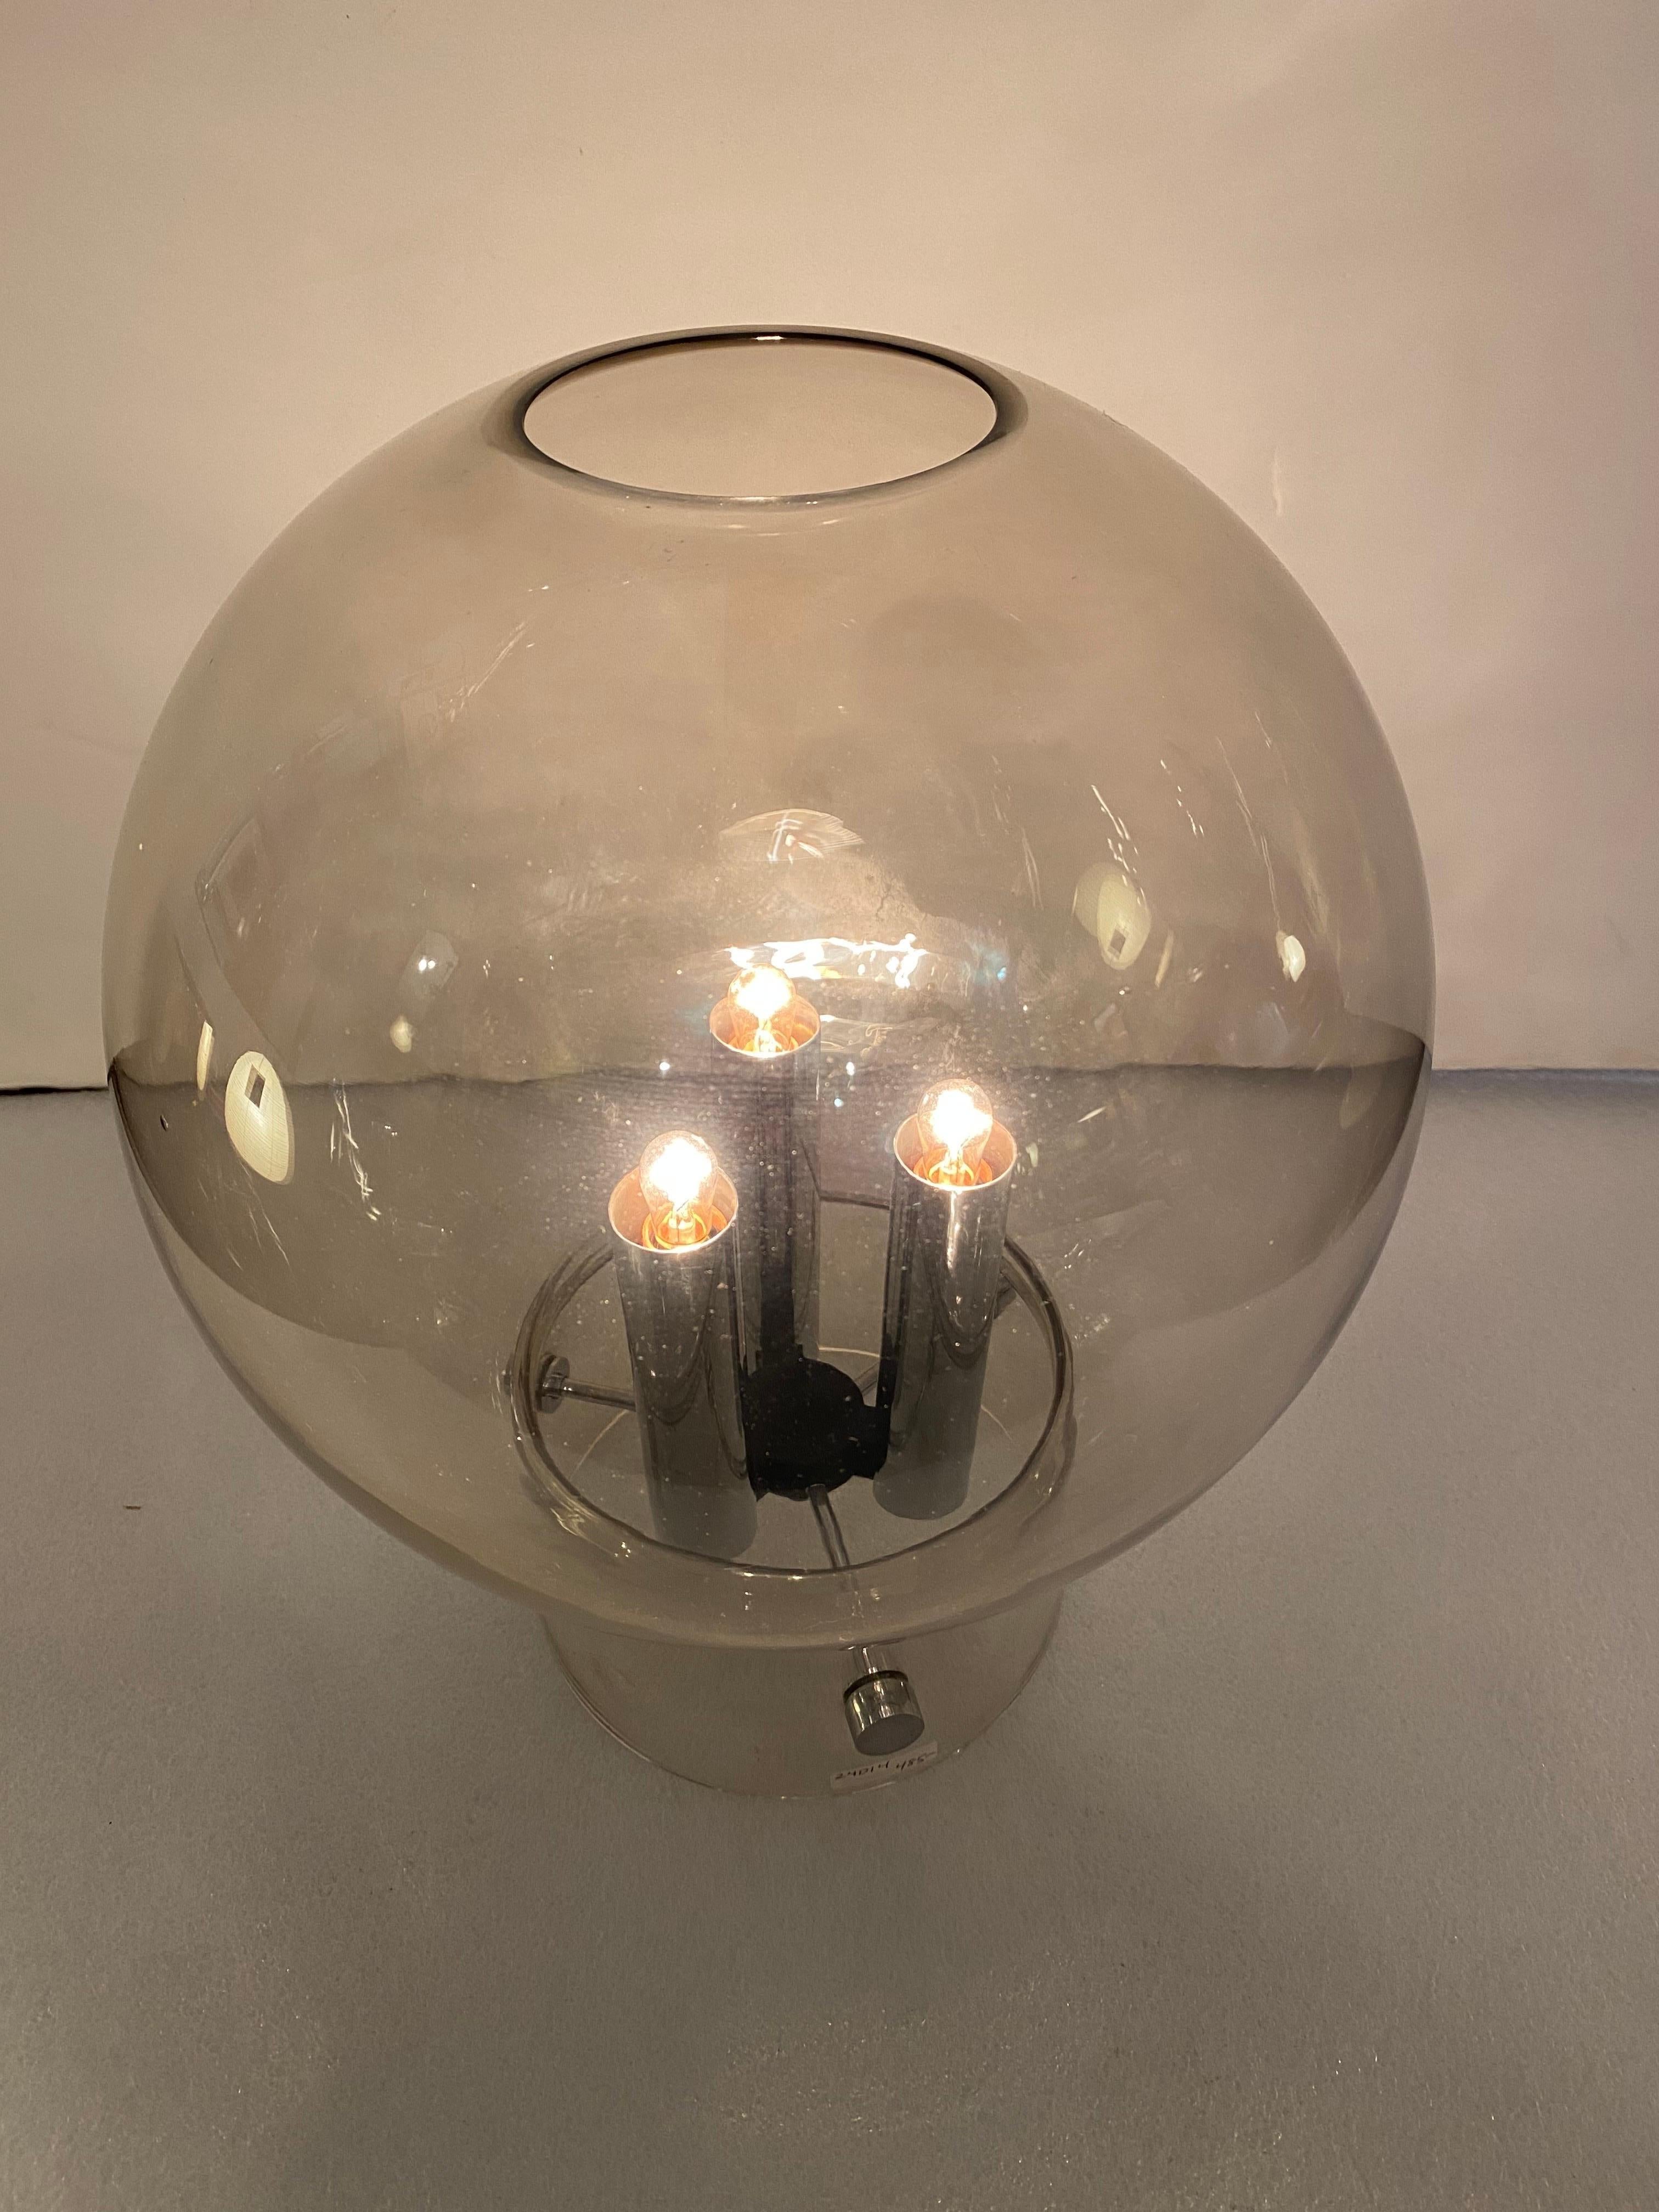 Smoked Glass Ball Table Lamp with Chrome accents.  Takes 3 bulbs, could be by Kovacs or Koch and Lowy.  Nice Look and would work in many applications!